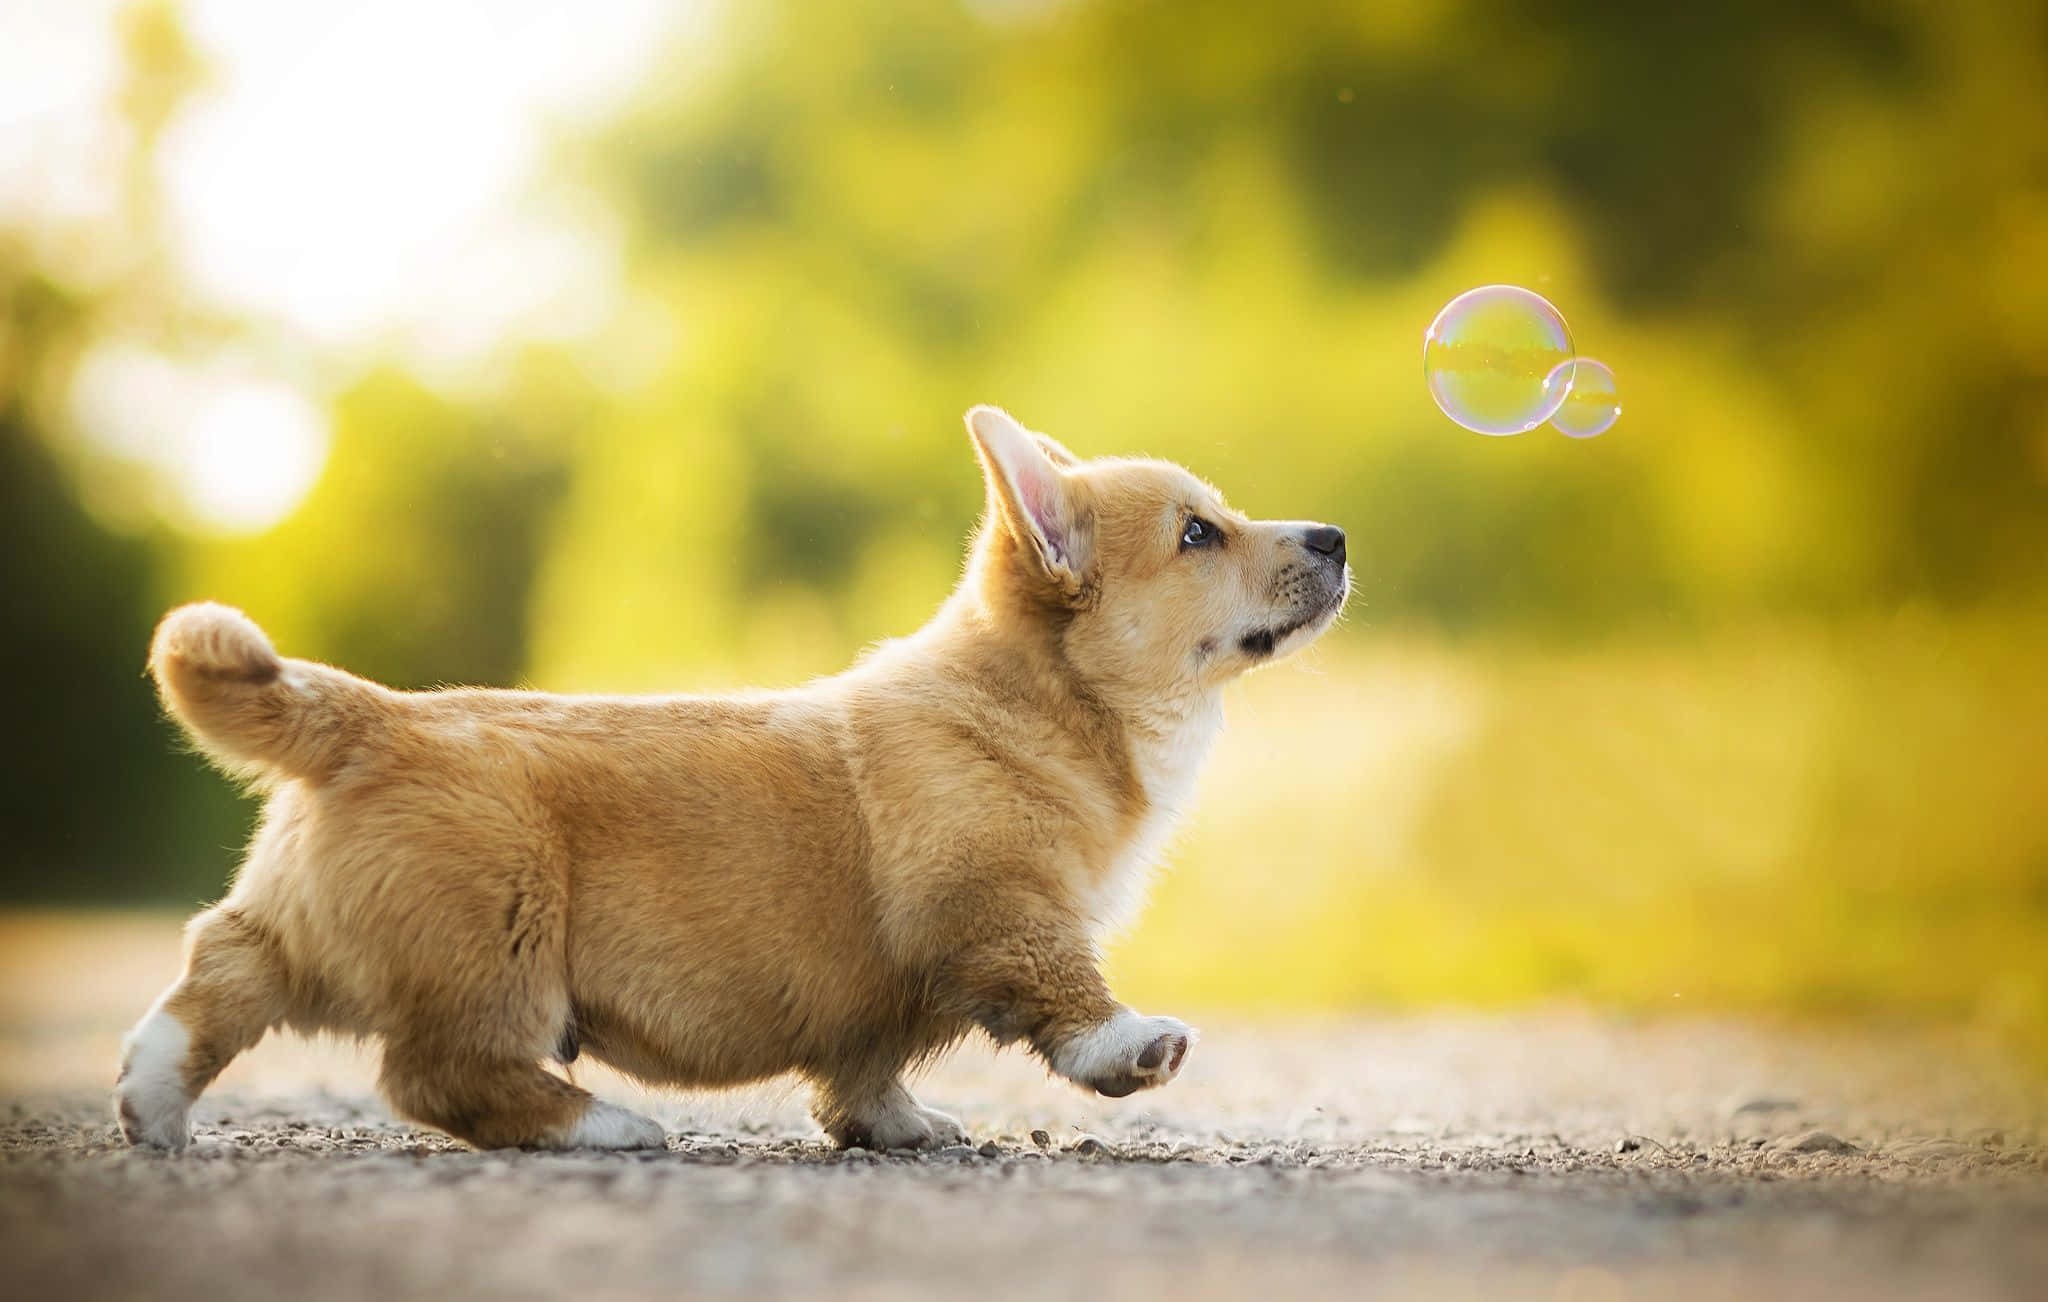 A Small Dog Is Blowing Bubbles In The Air